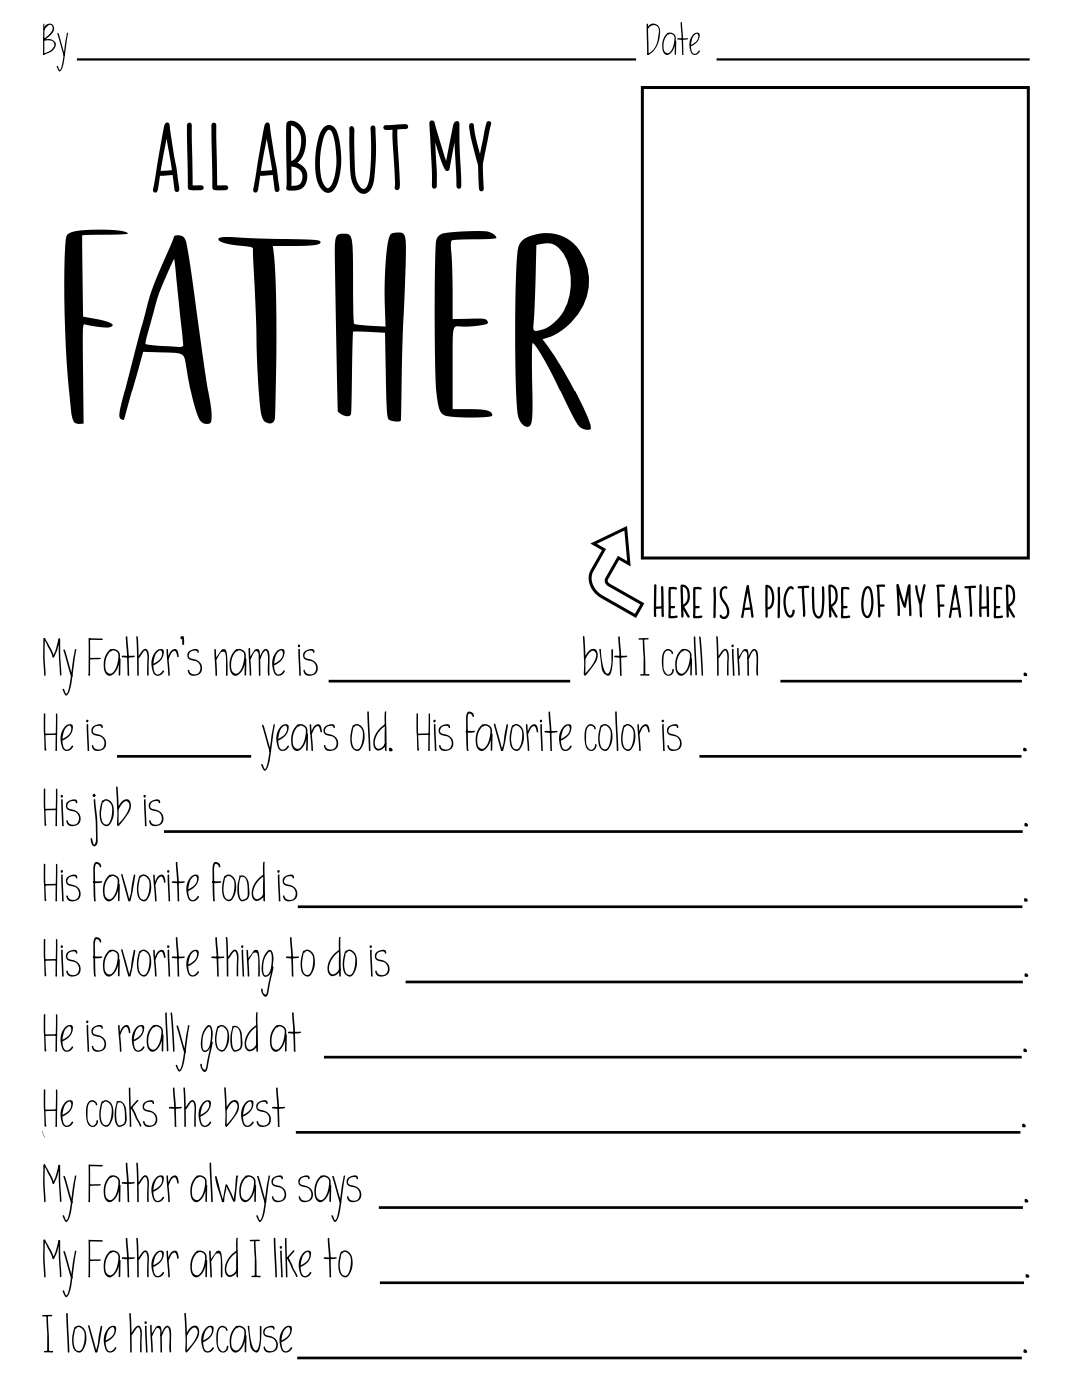 FREE All About My Dad Printable Questionnaire Perfect For Father s Day